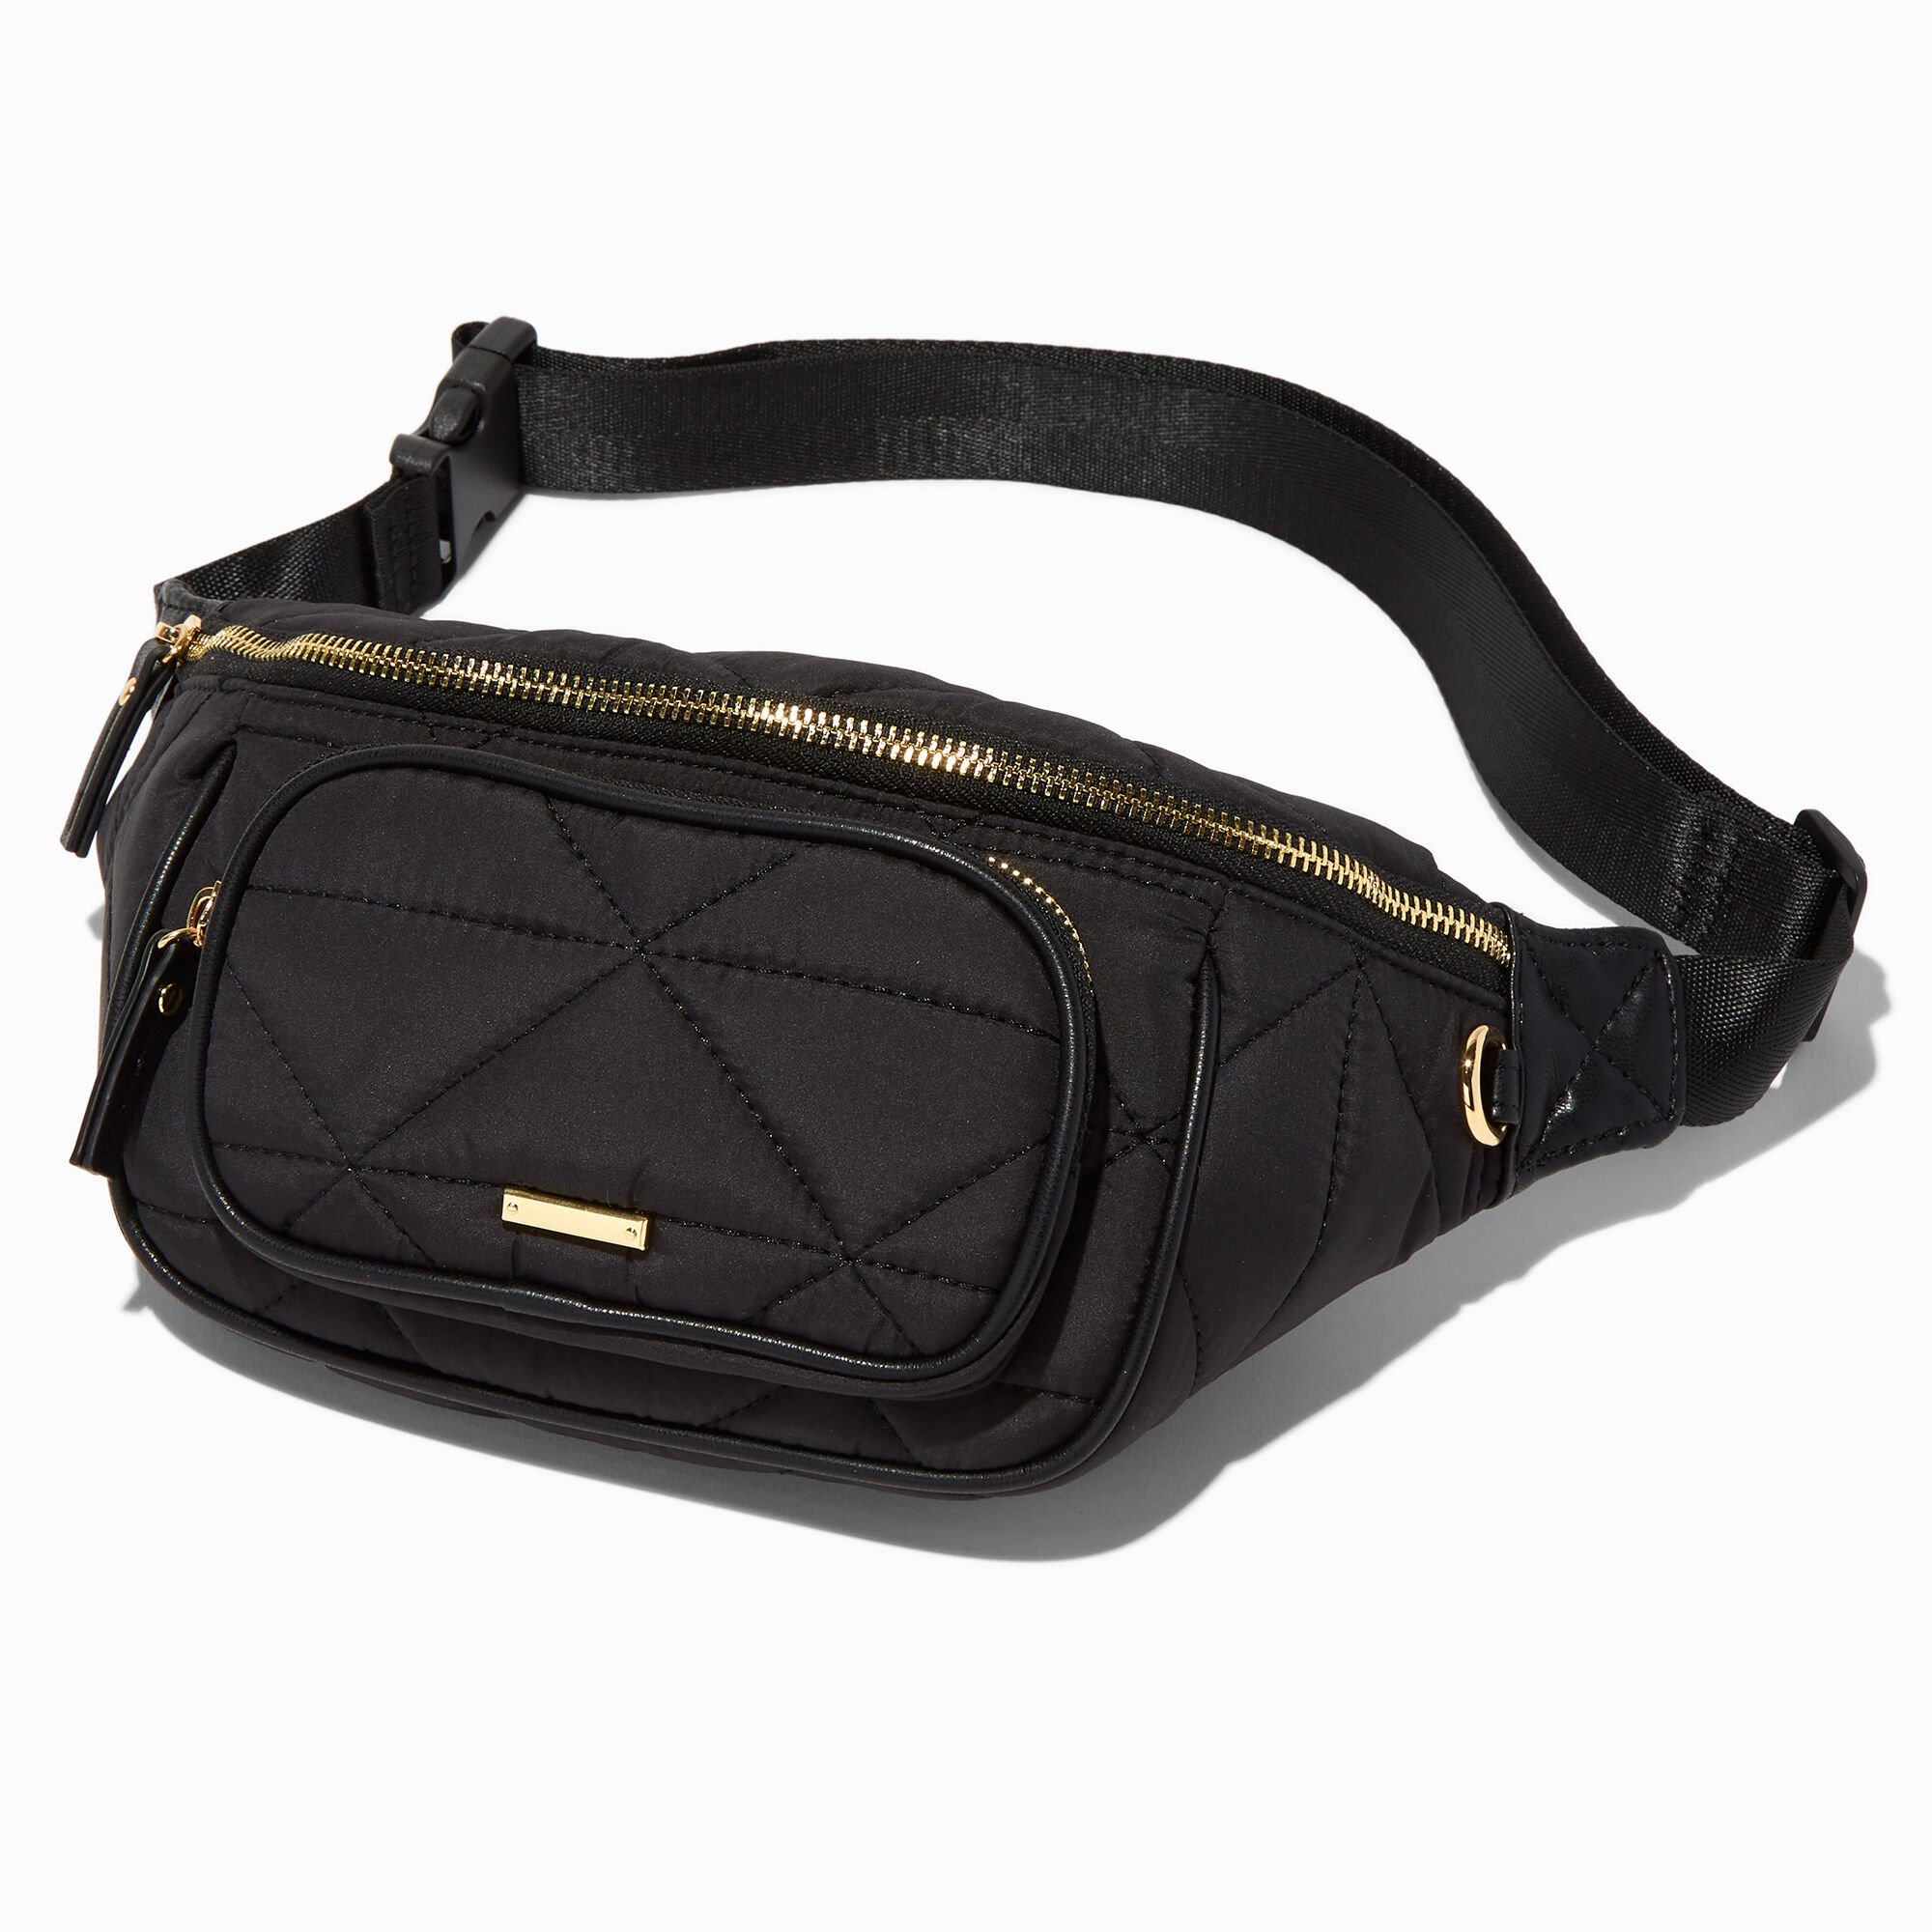 View Claires Quilted Nylon Bum Bag Black information